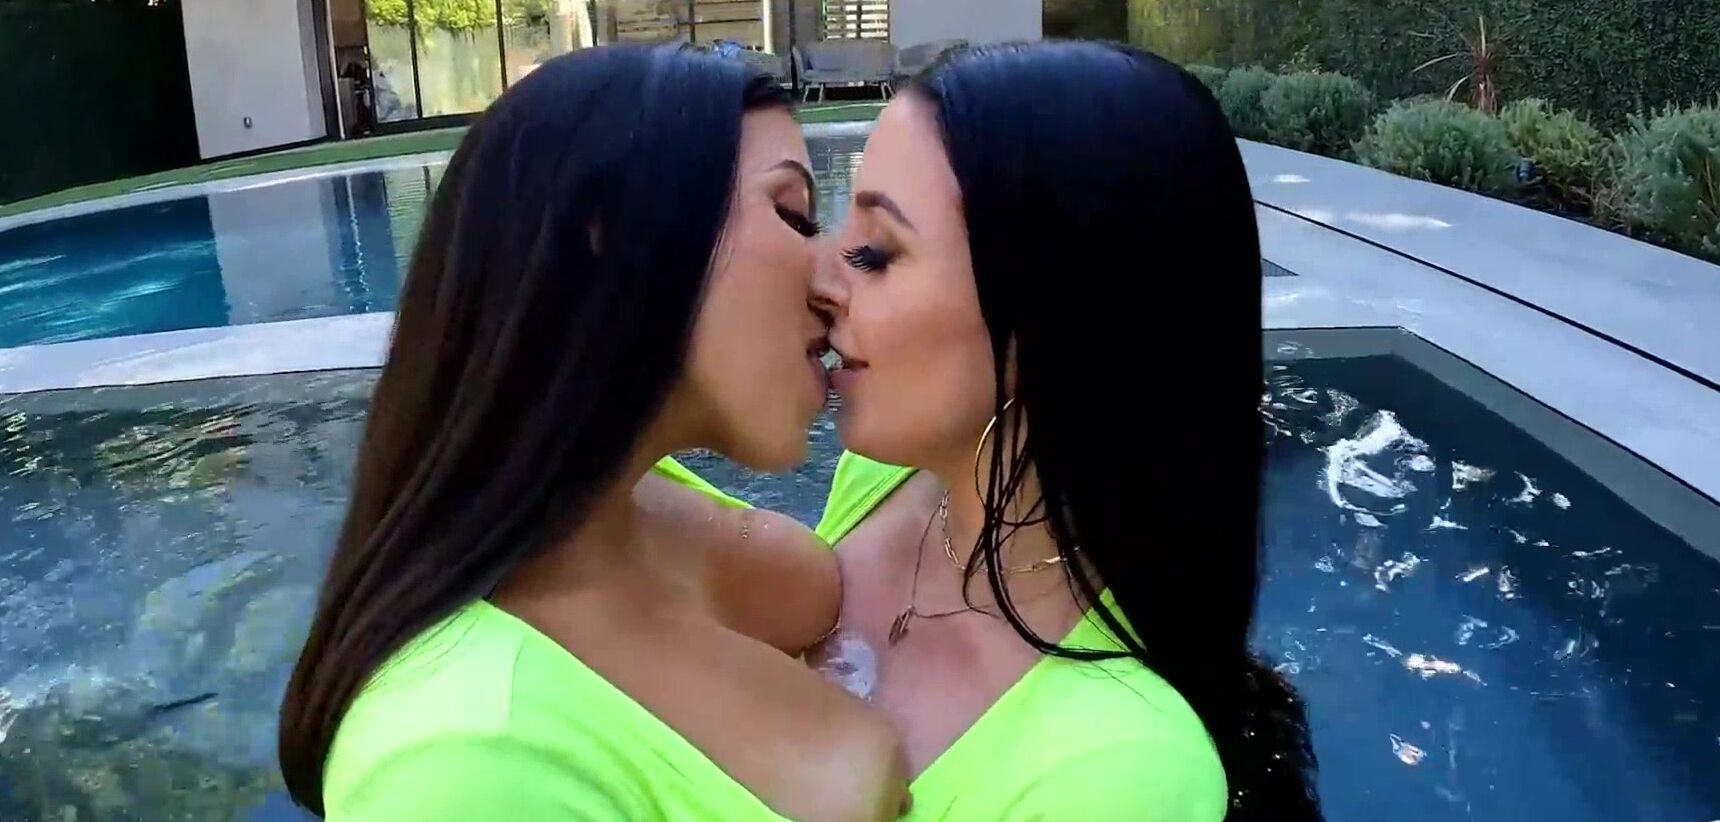 Threesome ANGELA WHITE - Threesome With Lena The Plug And Adam 22, Missionary Video - XXX Video photo